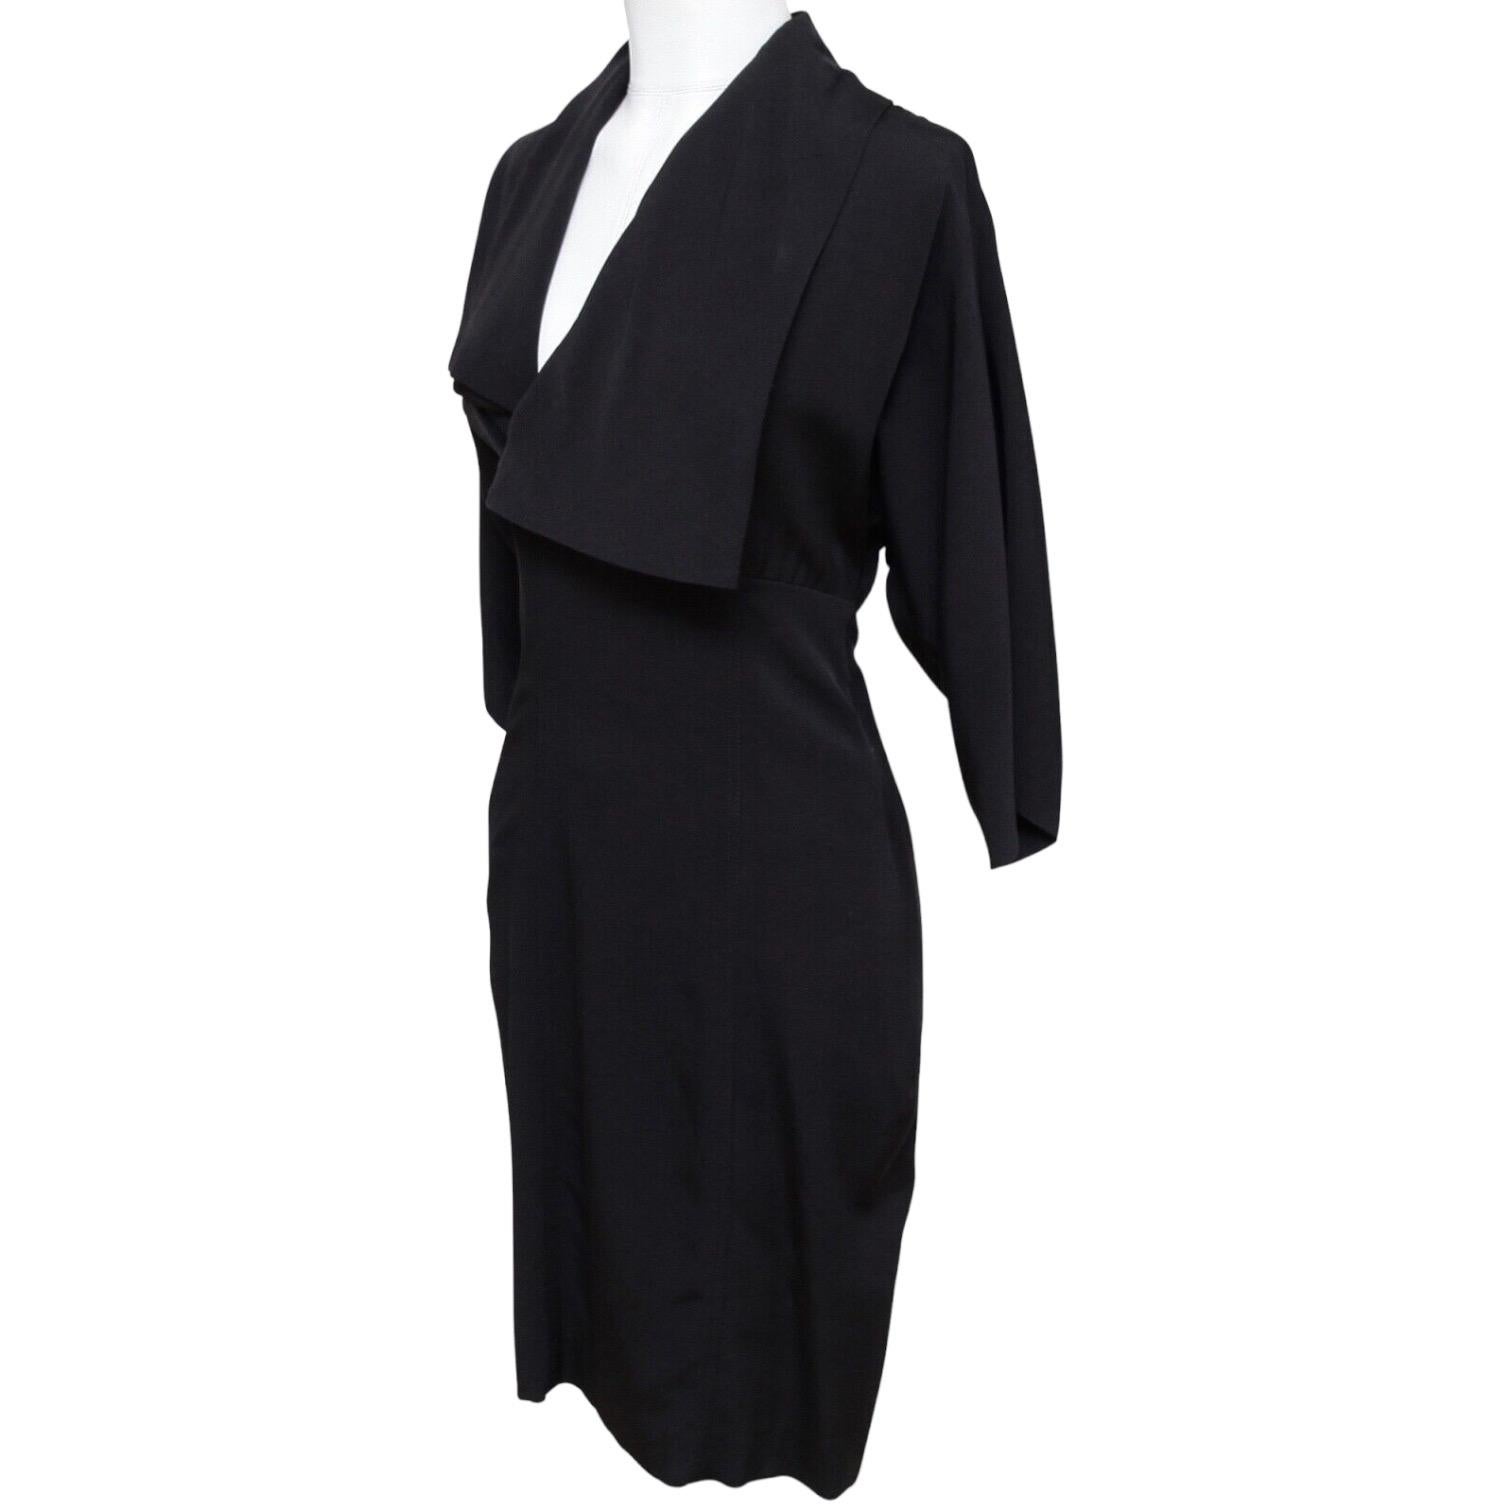 STELLA MCCARTNEY Black Dress Wool Silk V-Neck 3/4 Sleeve Sz 38 In Excellent Condition For Sale In Hollywood, FL